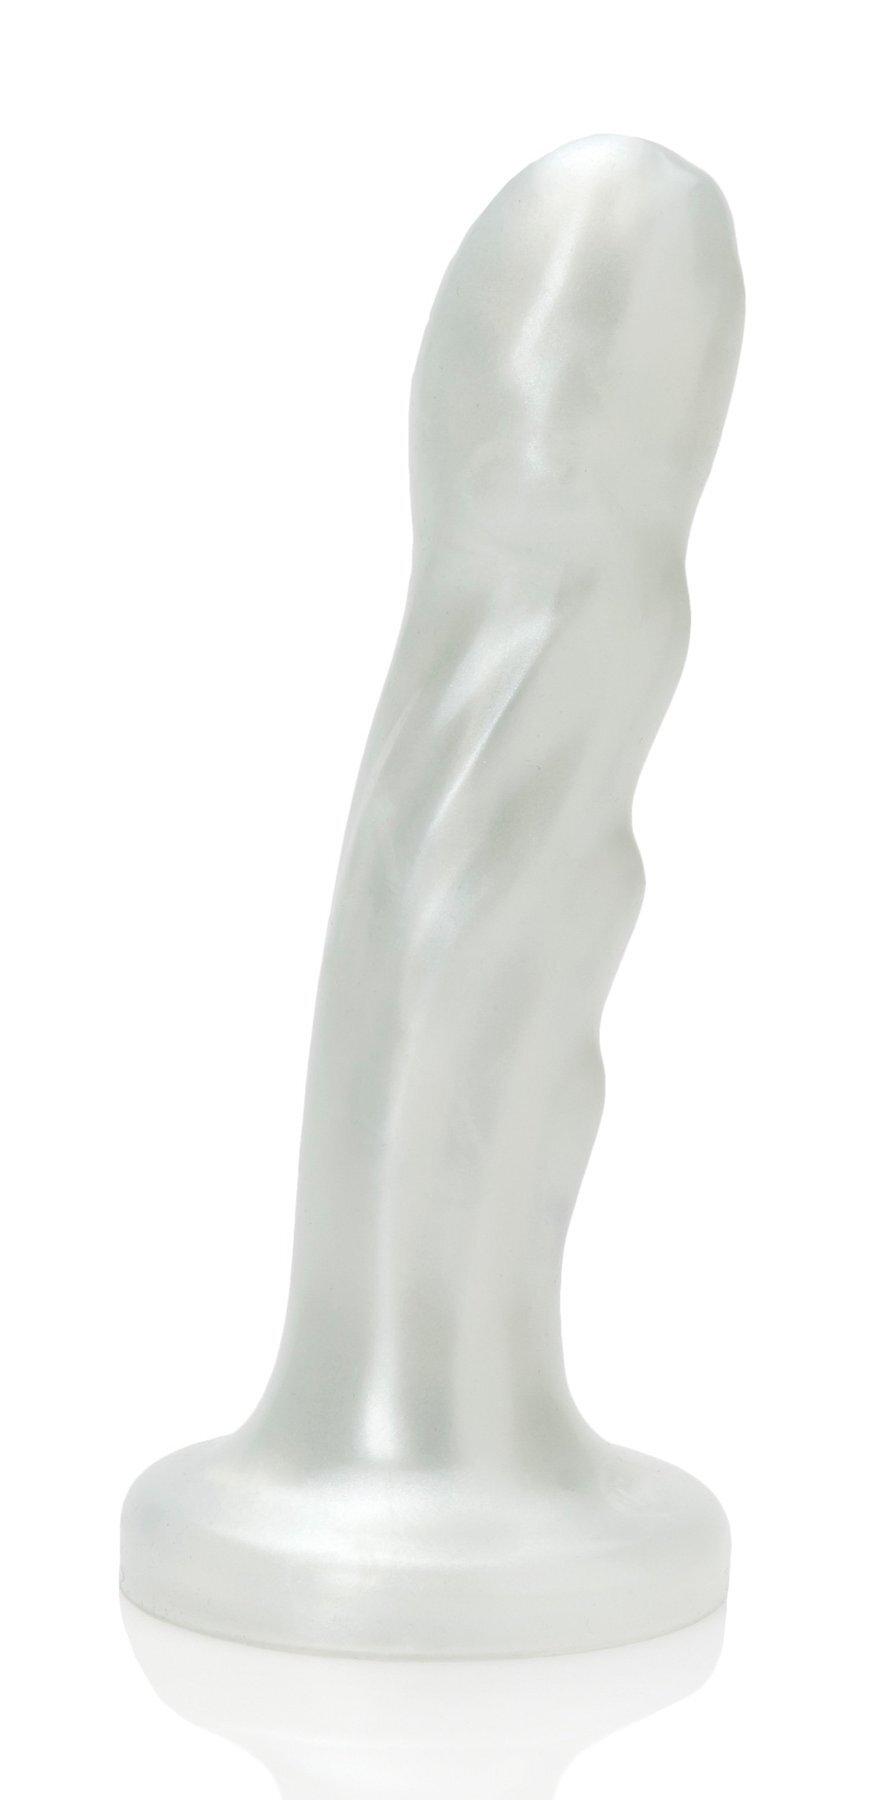 Goddess by Tantus (online store)